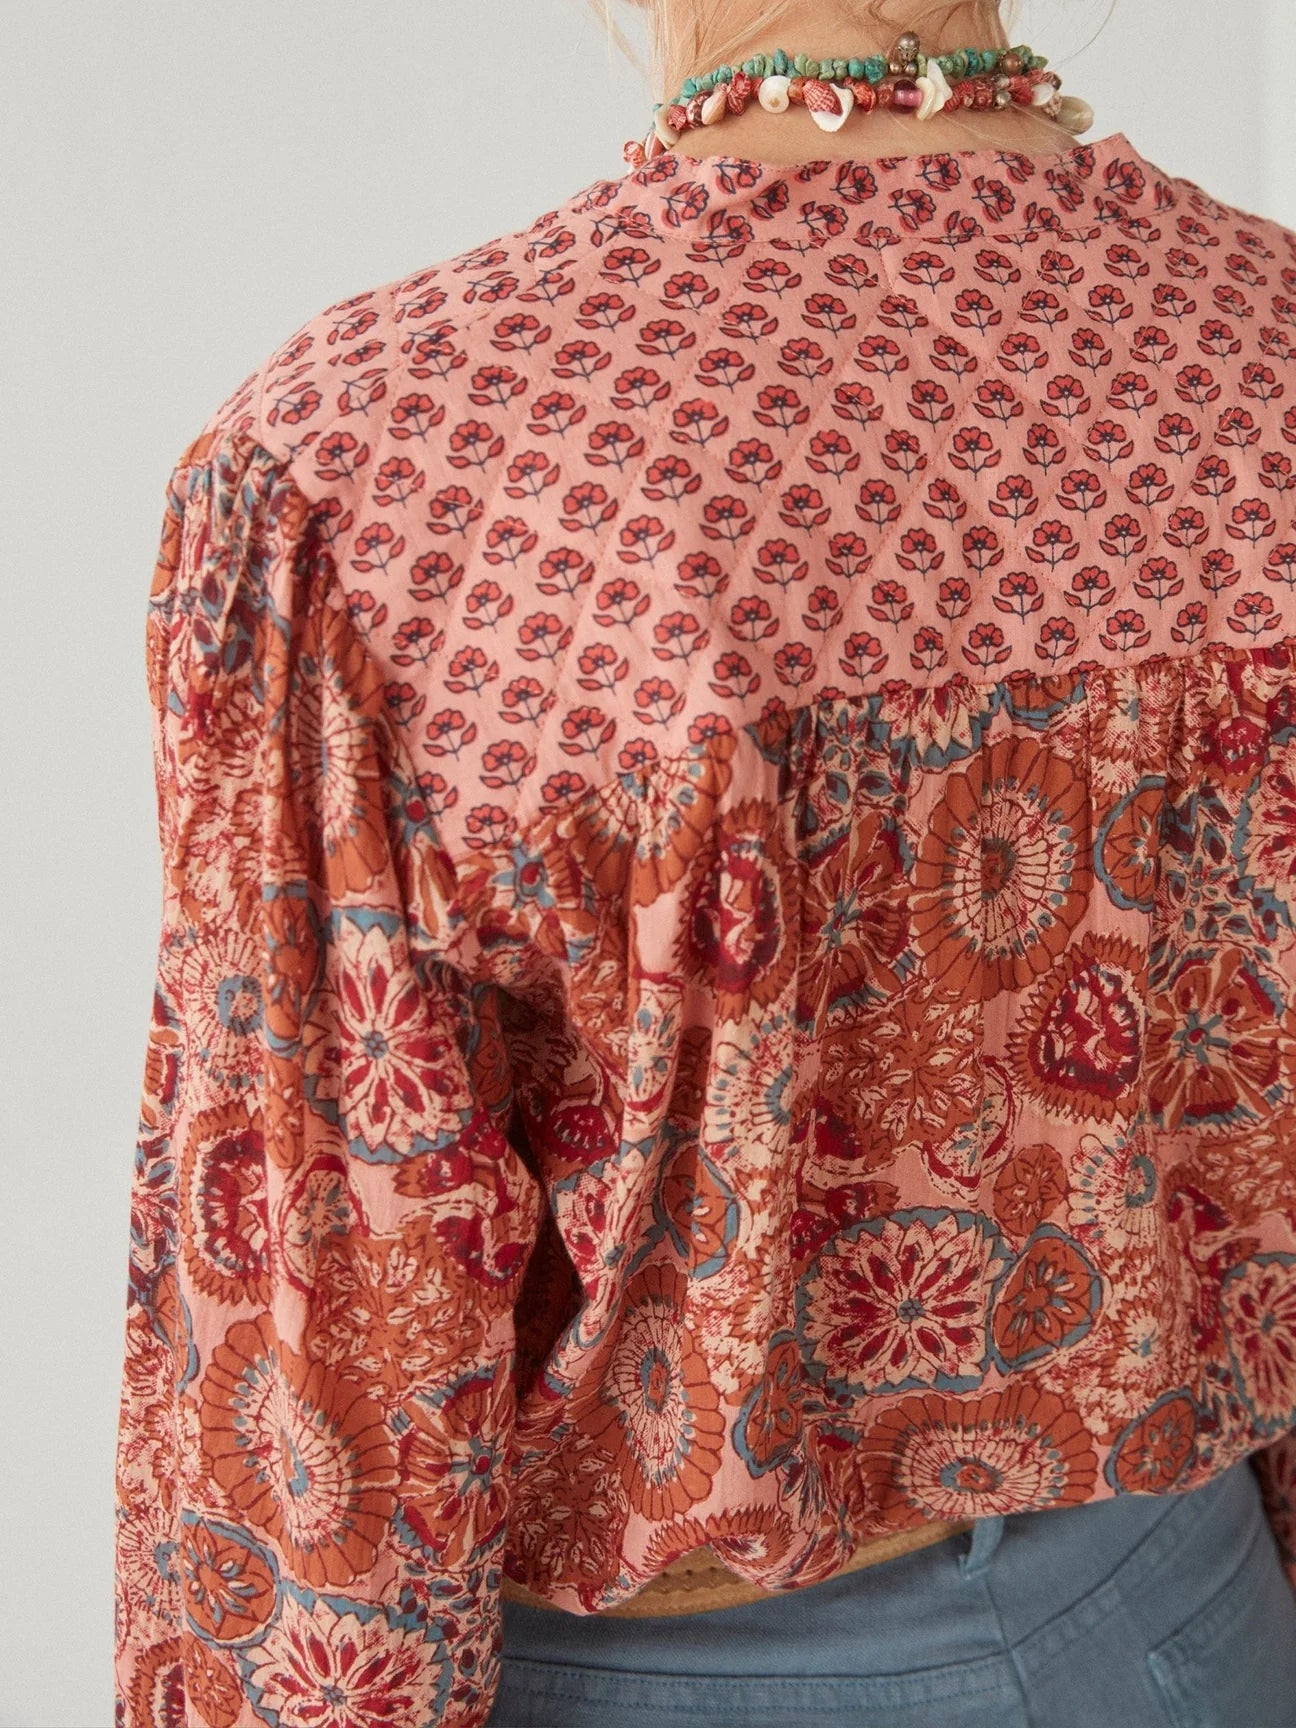 Back view of the Kaleido Garden Beatrice Blouse by Maison Hotel